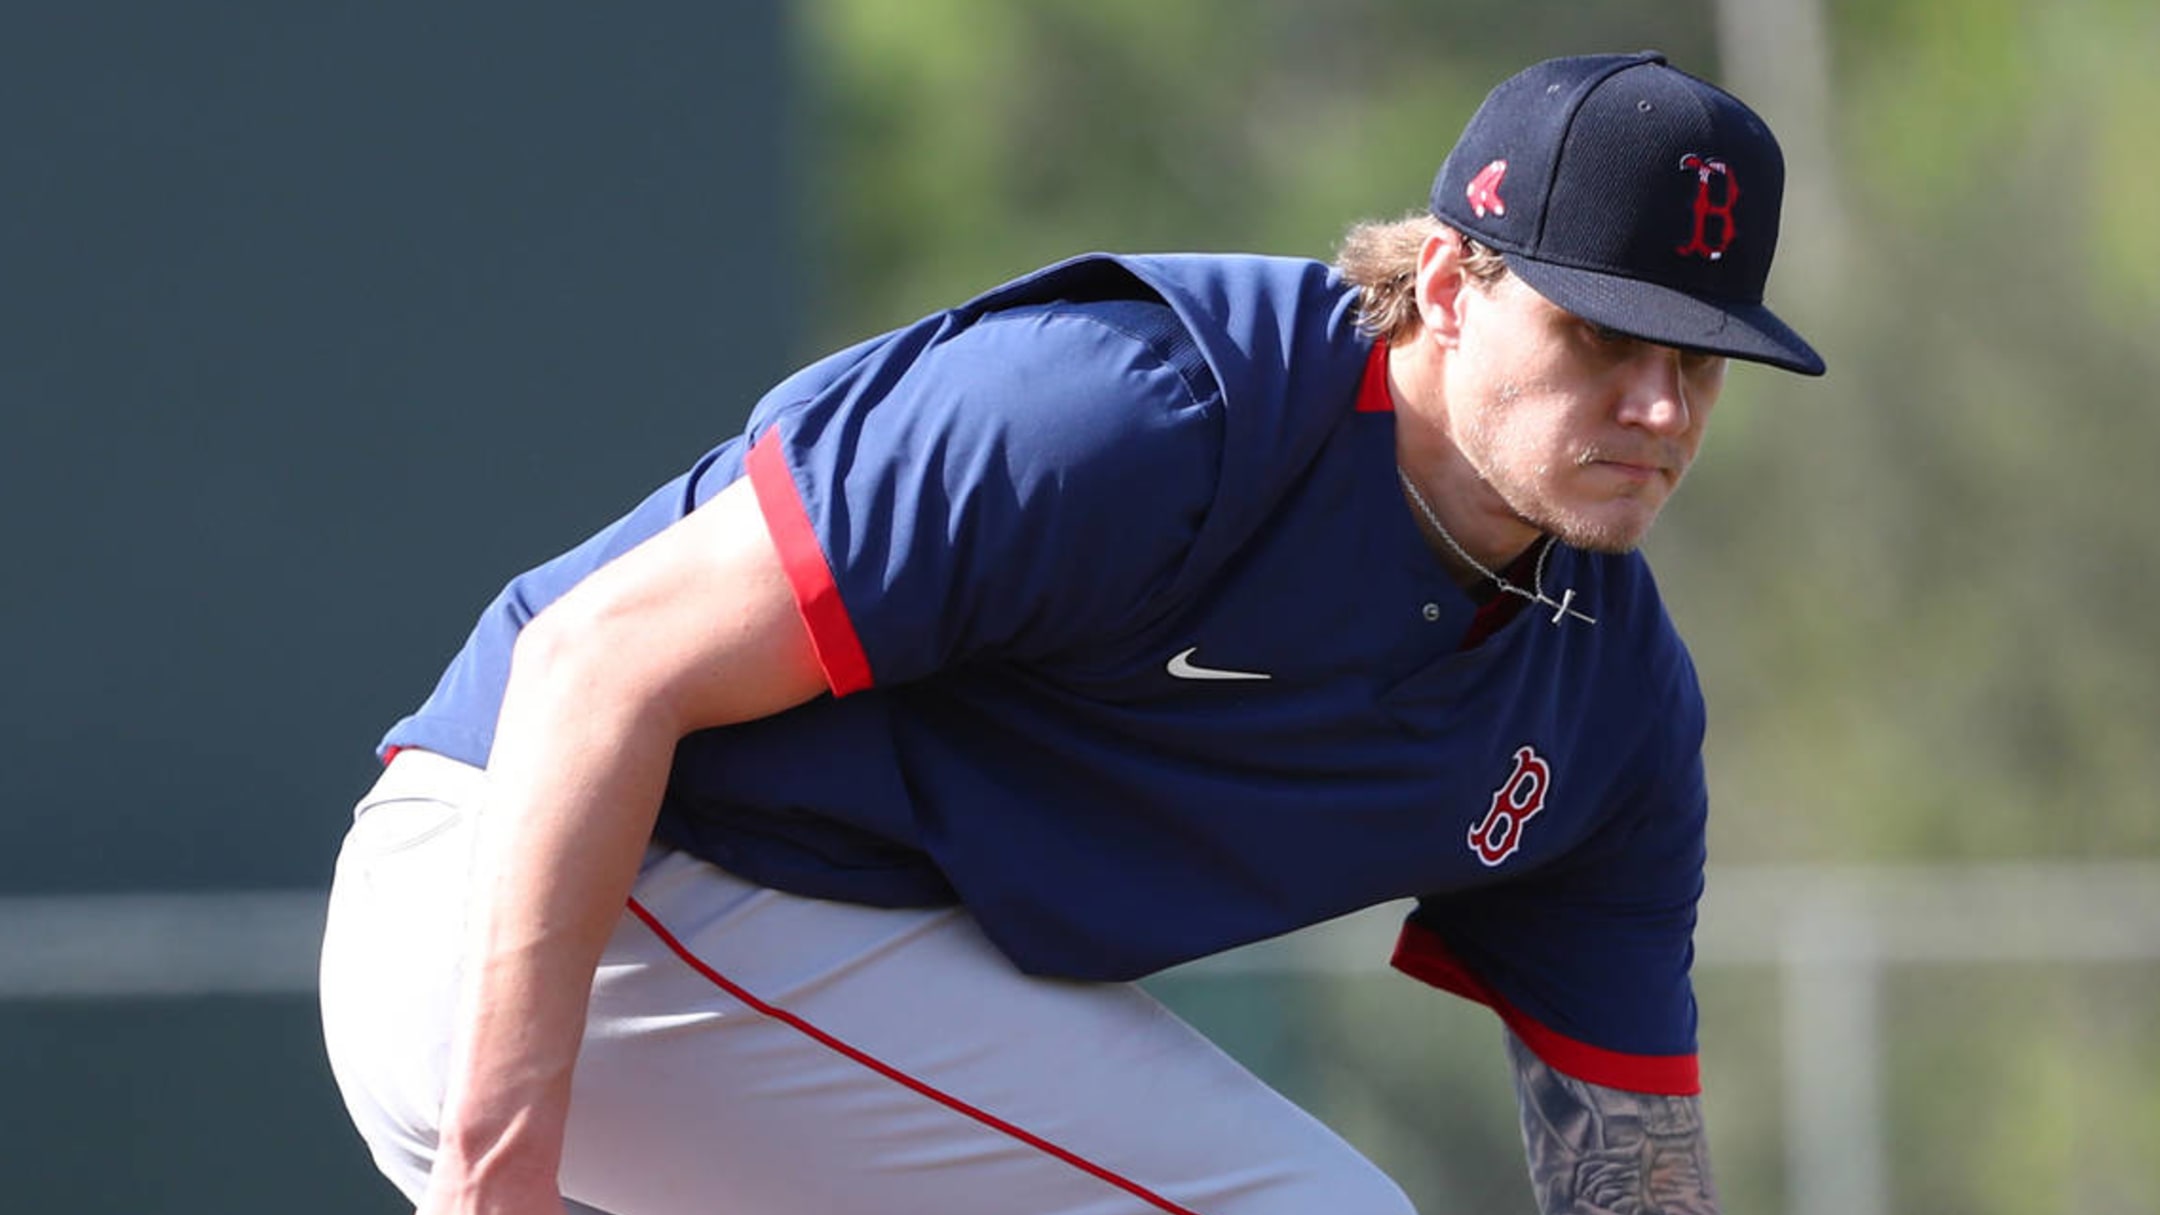 Boston Red Sox prospect Tanner Houck, a 2017 first-rounder, has